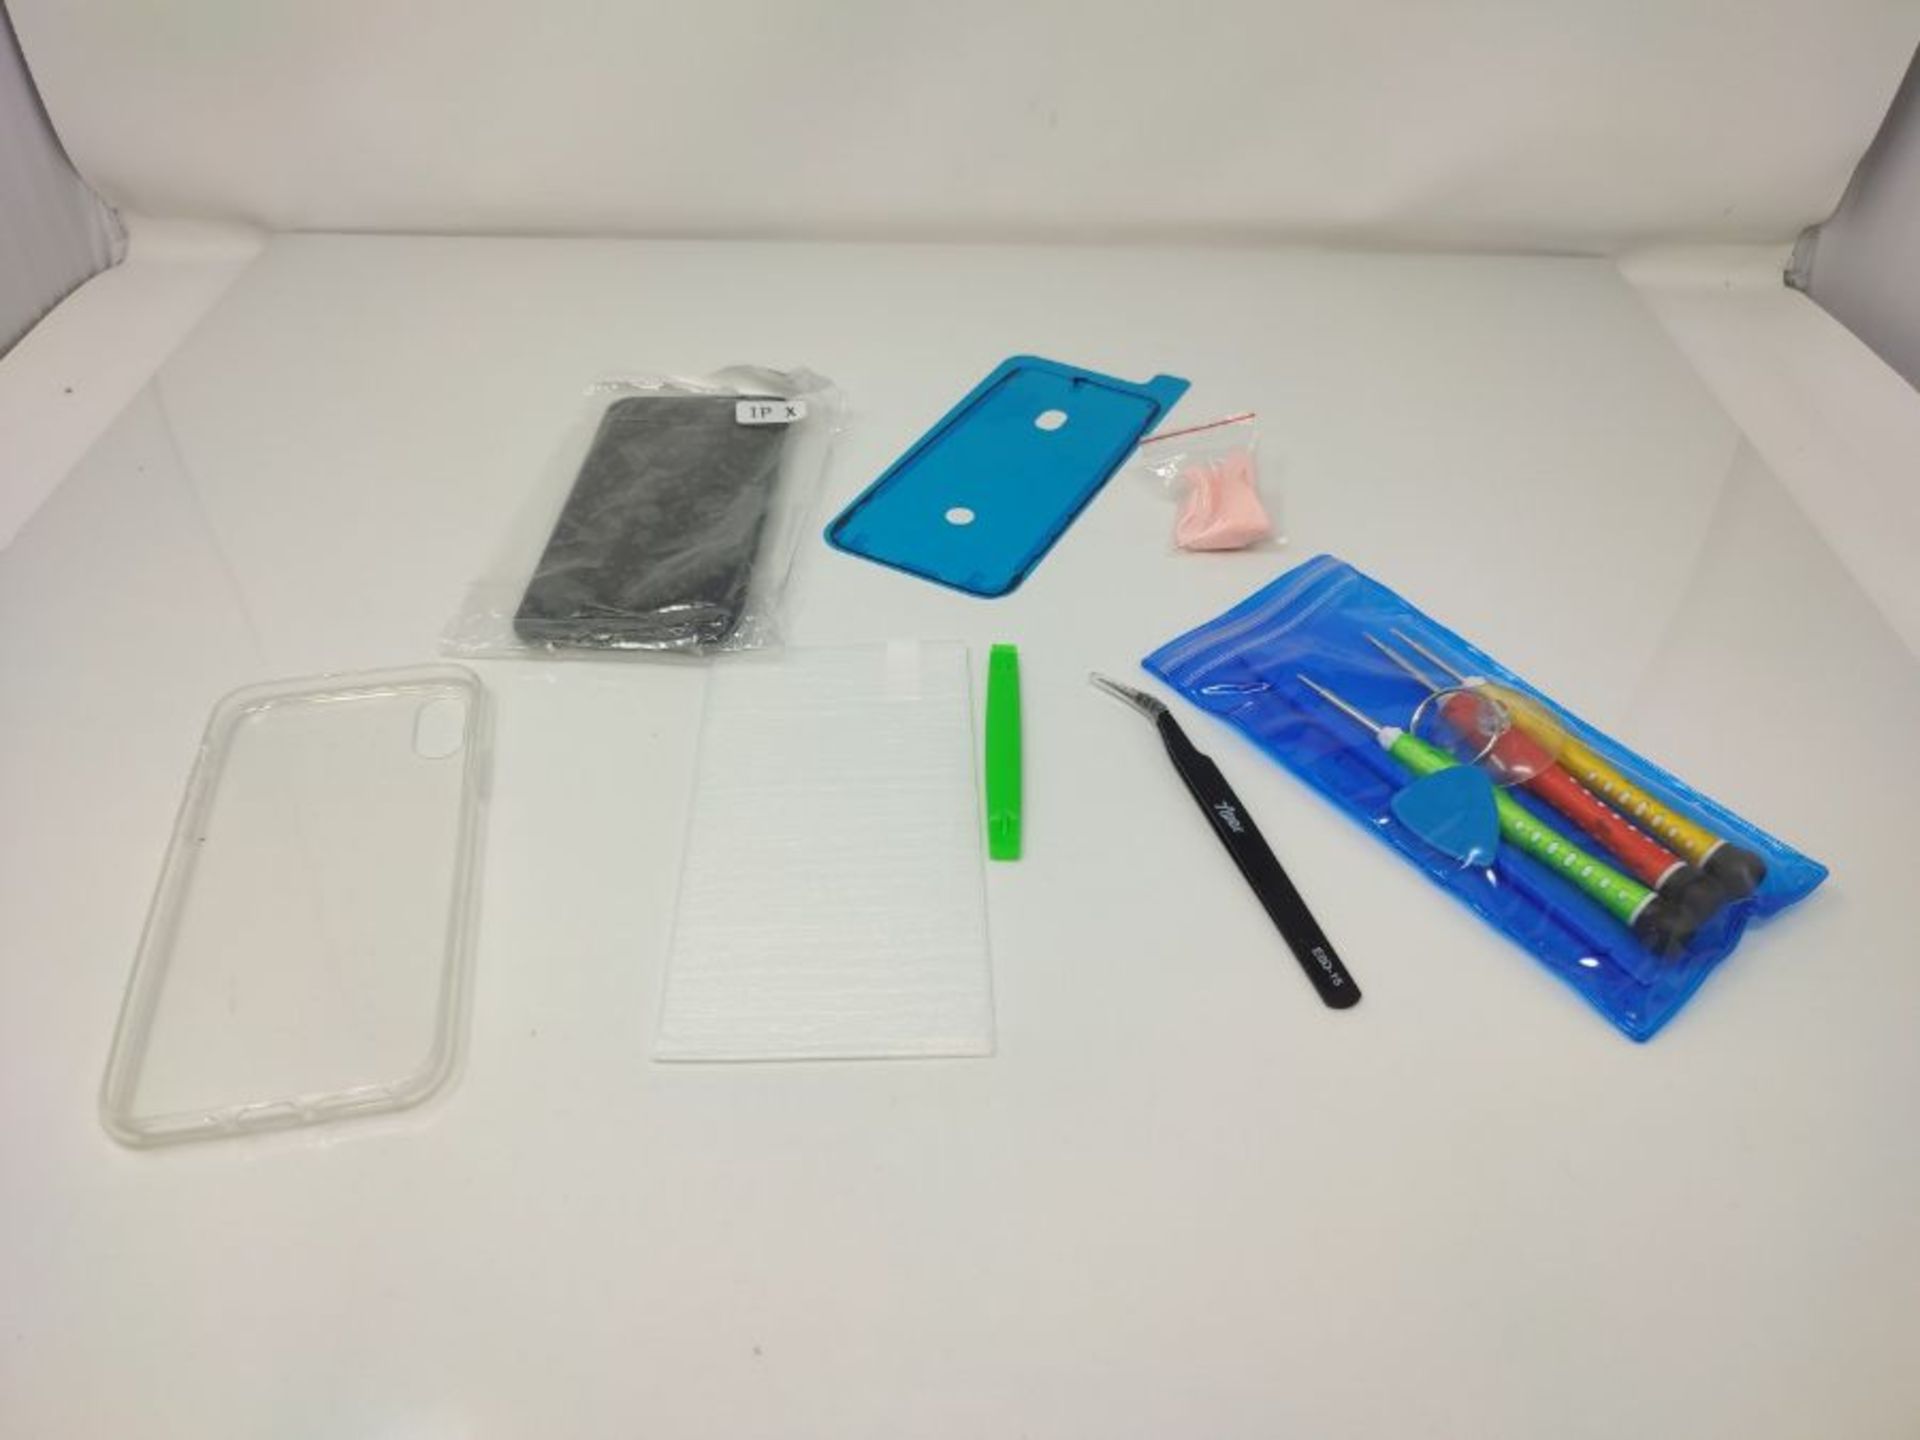 Screen Replacement for iPhone Xs 5.8 inch A1920, A2097, A2098,A2099, A2100 Touch Scree - Image 3 of 3